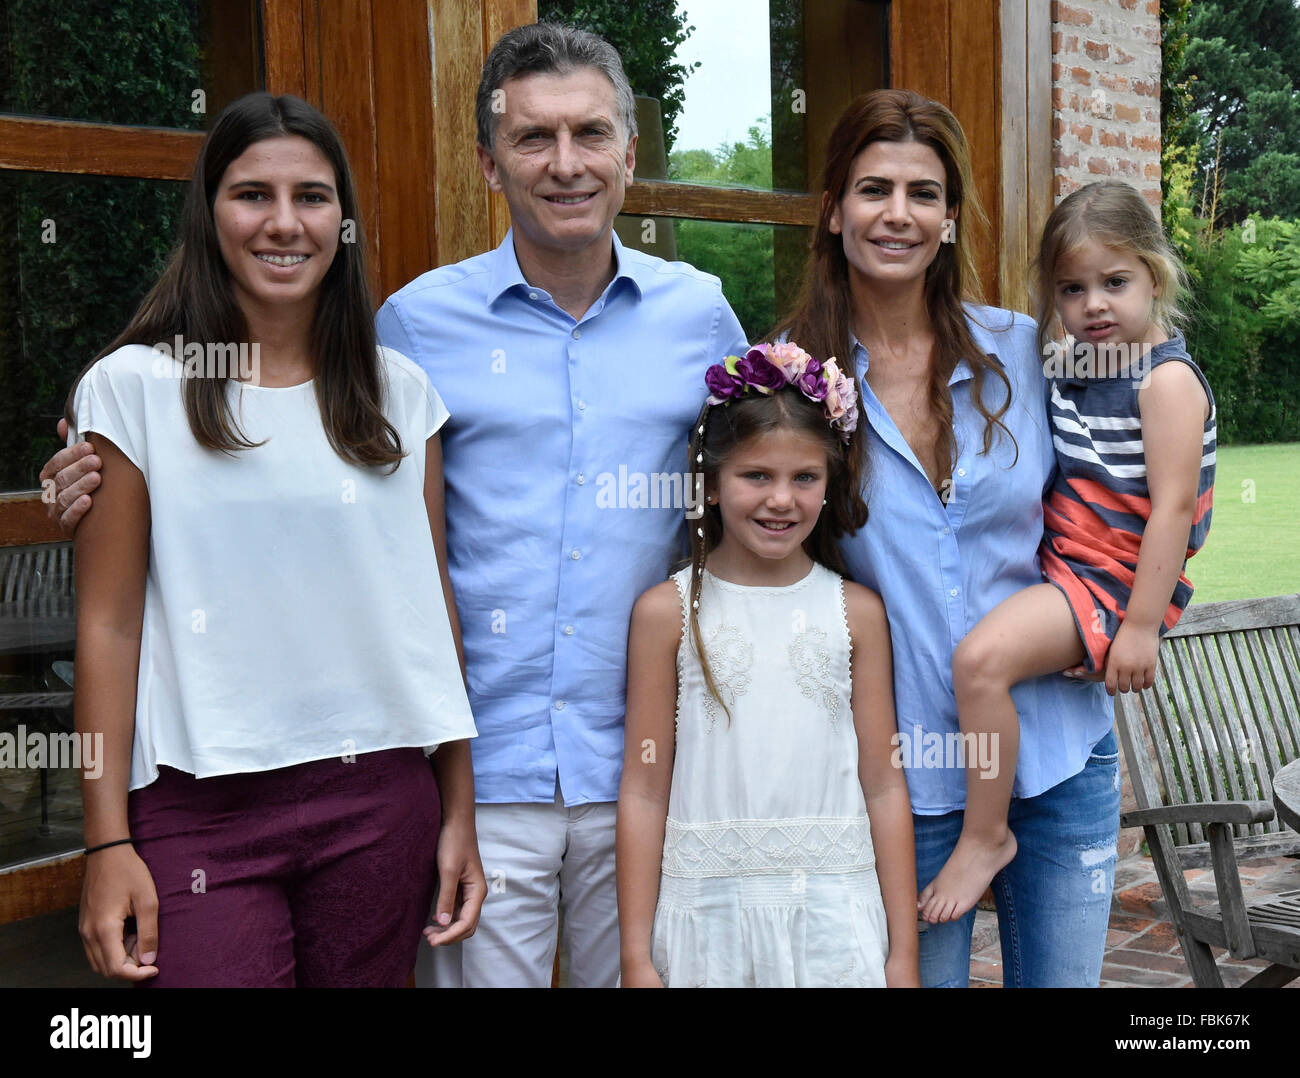 Buenos Aires, Argentina. 17th Jan, 2016. Argentina's President Mauricio Macri (2nd L), accompanied by First Lady Juliana Awada (2nd R) and their daughter Antonia (1st R), poses with Iara (1st L) and Kala Nisman (3rd R), daughters of late prosecutor Alberto Nisman, at his particular residence of 'Los Abrojos', in Los Polvorines town, Buenos Aires Province, Argentina, on Jan. 17, 2016. According to local press, Muricio Macri received on Sunday Iara and Kala Nisman, daughters of Alberto Nisman who was found dead. Credit:  Xinhua/Alamy Live News Stock Photo